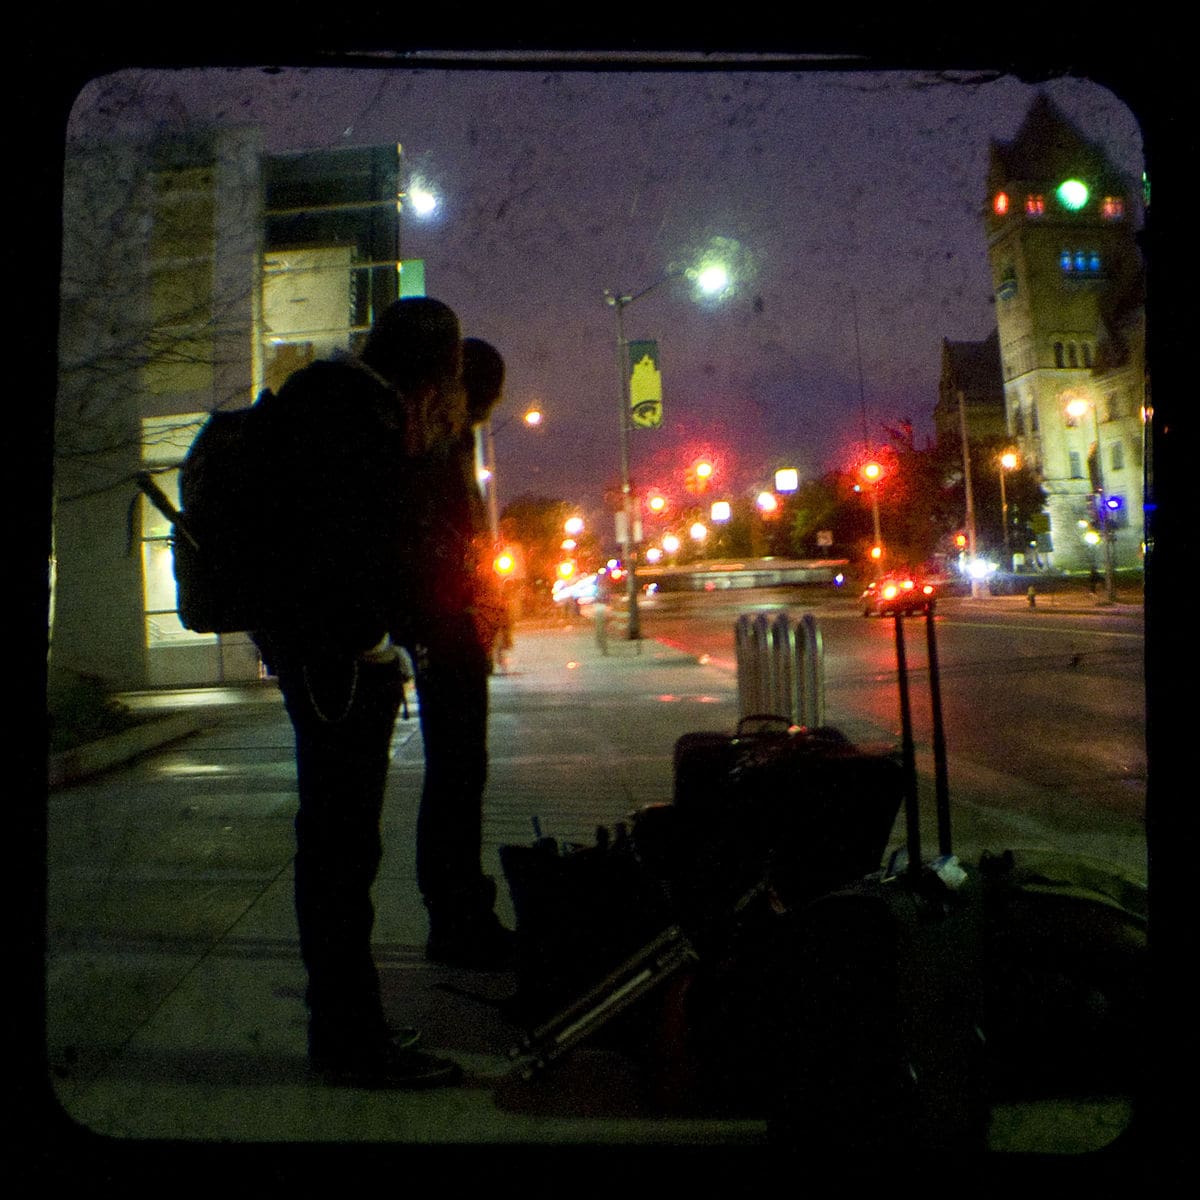 Photo of two people under an overpass in the middle of the night. They are looking down at a pile of luggage. The scene is lit up by streetlights.